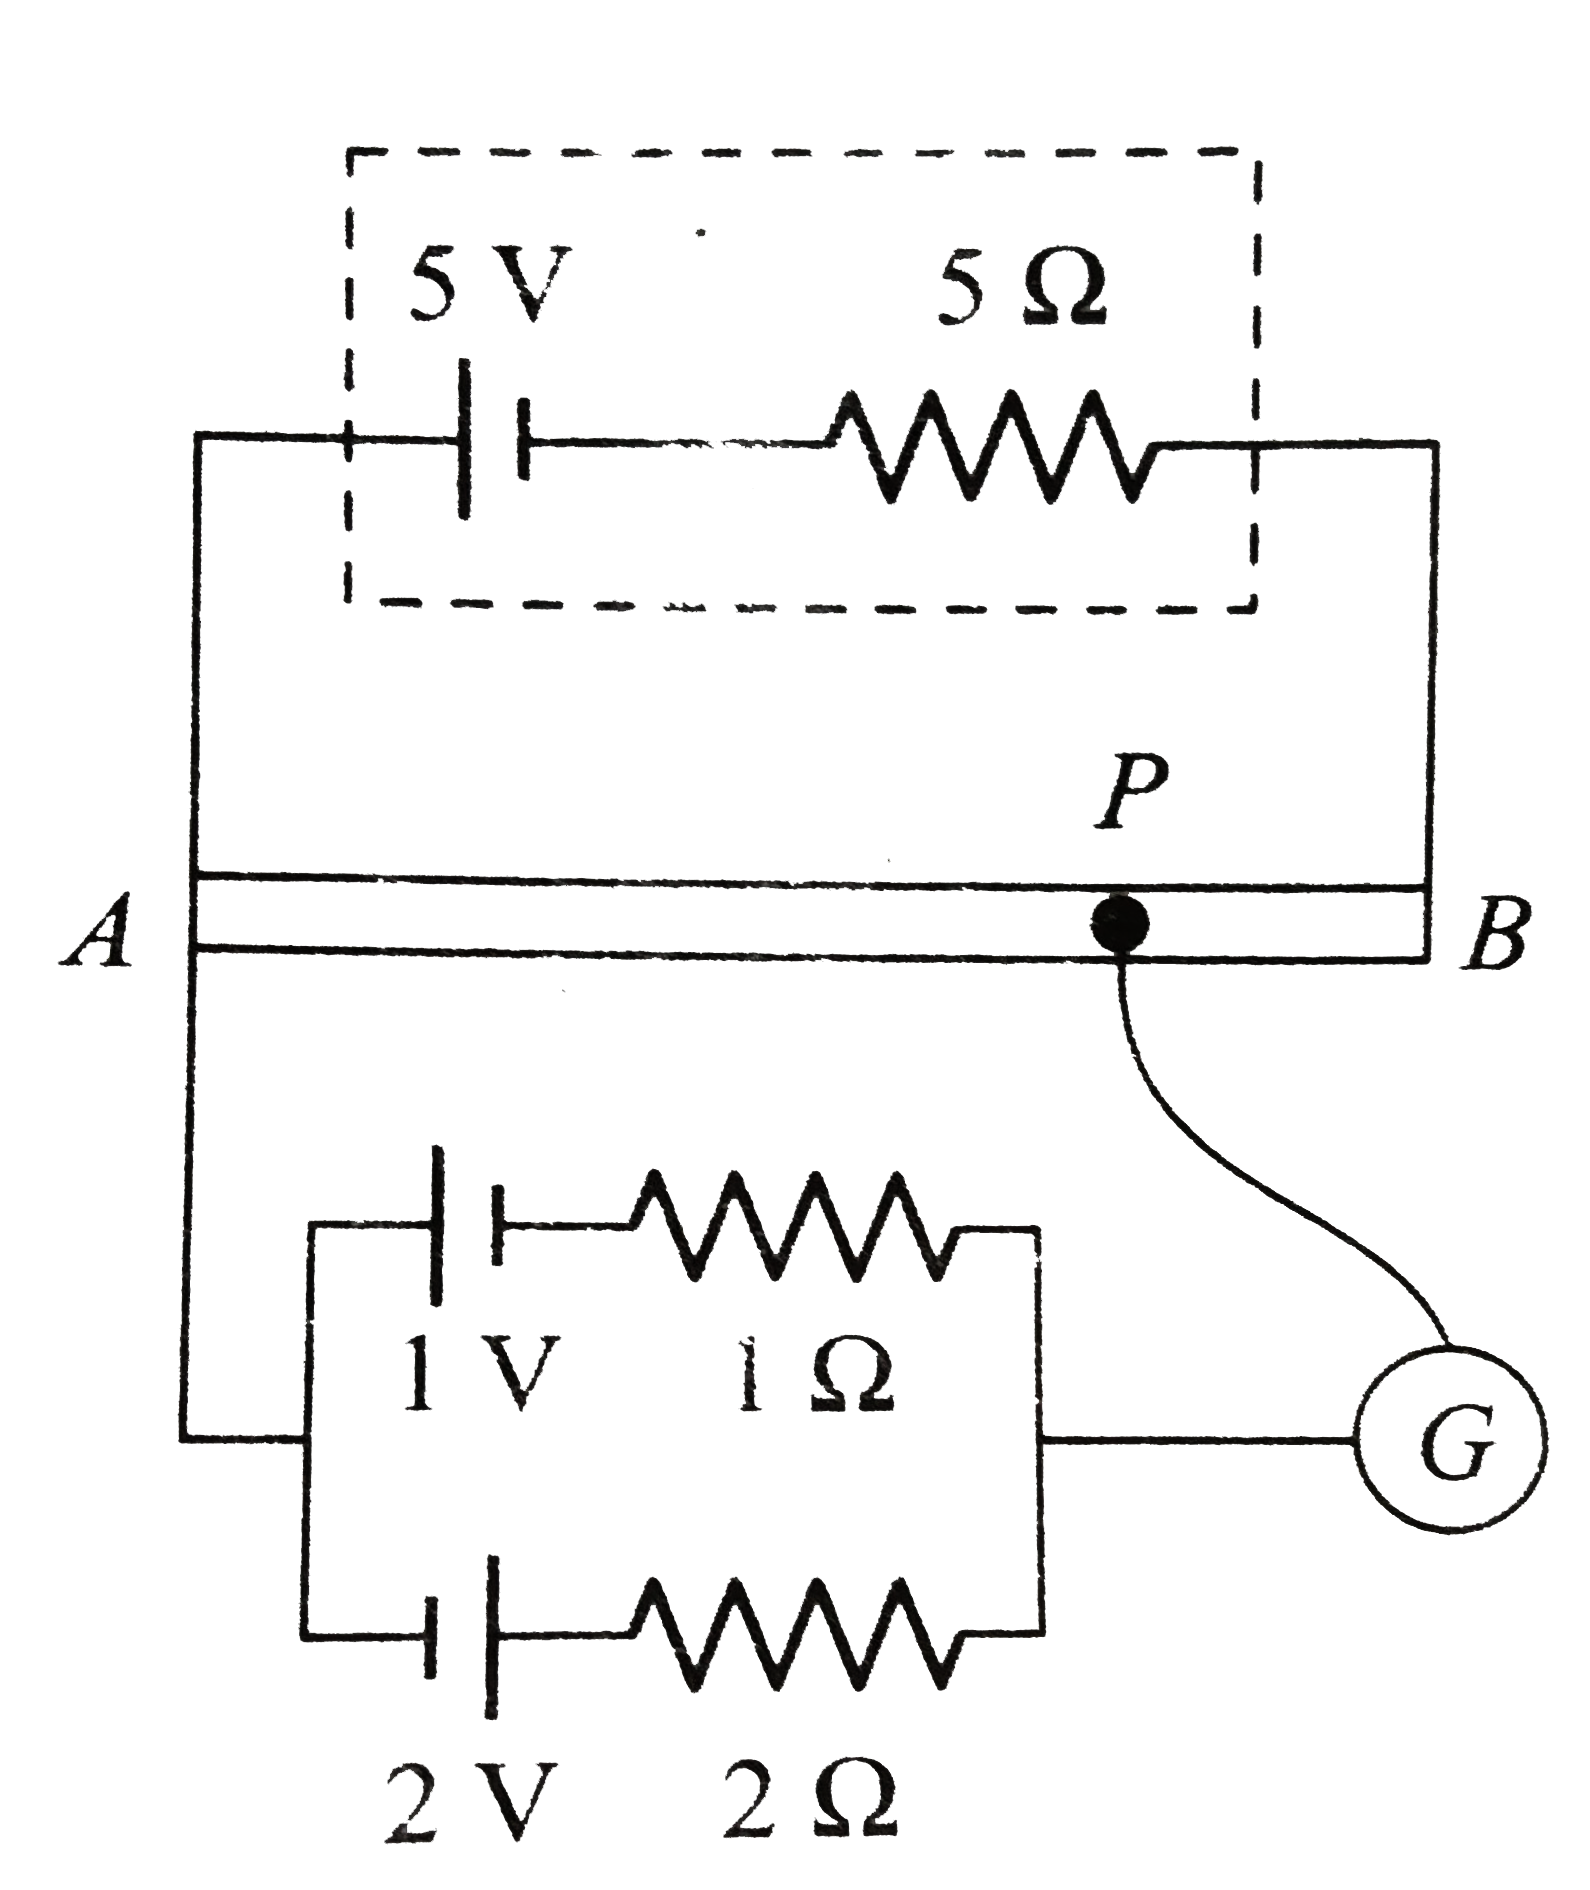 A battery of emf epsilon0 = 5V and internal resistance 5 Omega is connected across a long uniform wire AB of length 1m and resistance per unit length  5 Omegam^(-1). Two cells of epsilon1 = 1 V and epsilon2 = 2V are connected as shown in the figure.